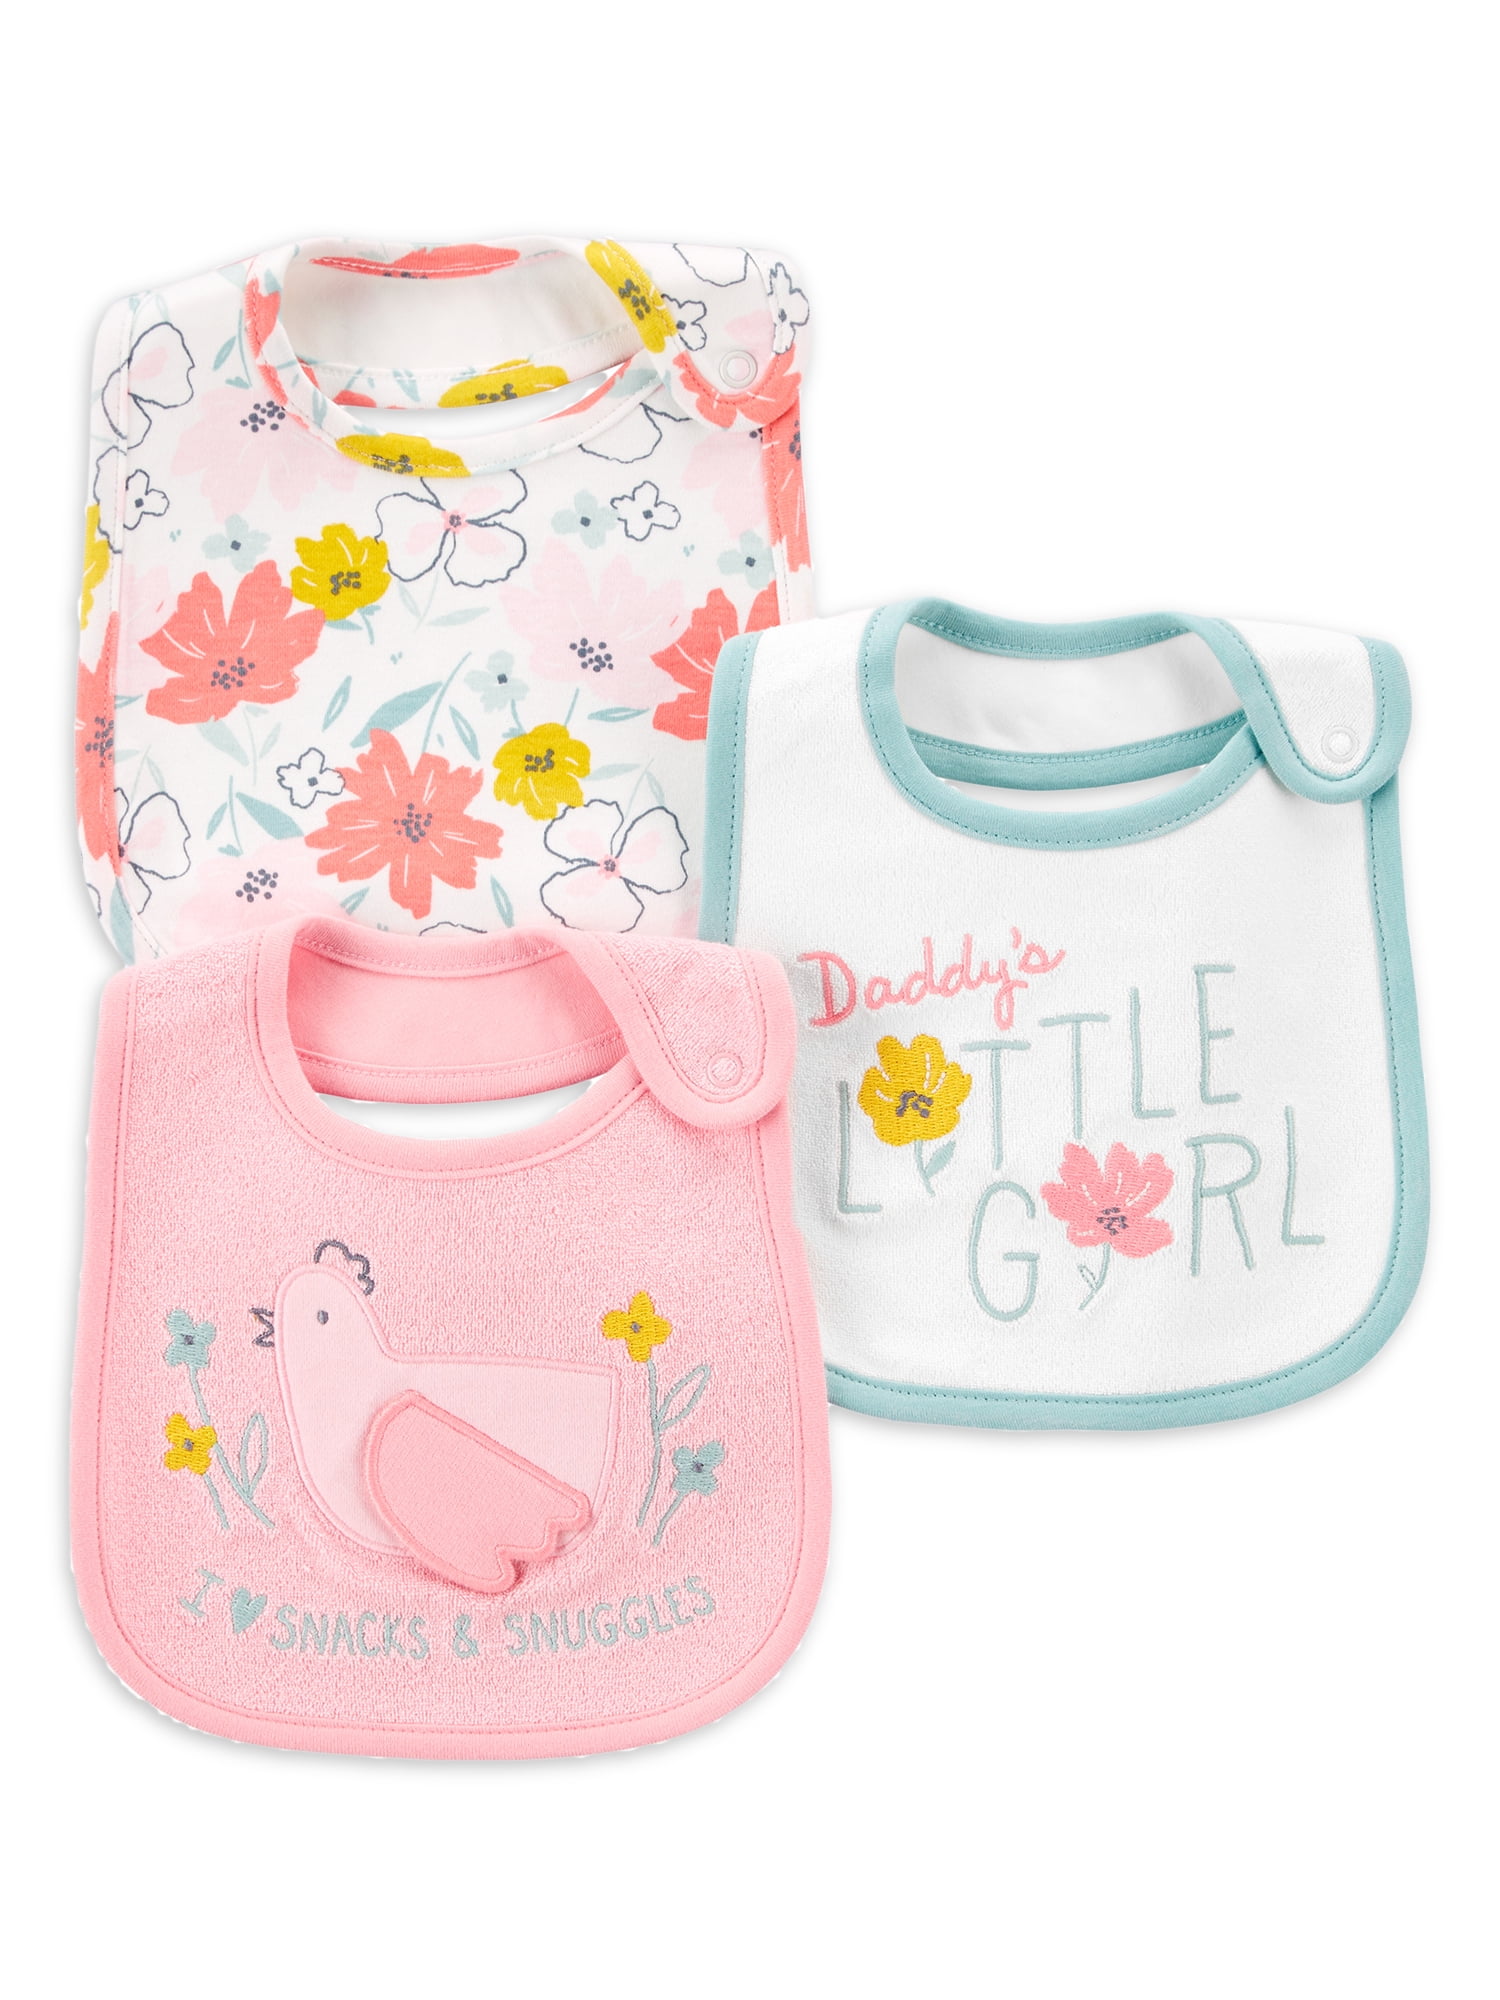 NEW Baby Infant Girl 10 Piece Water Resistant feeding droolBib Set FREE SHIPPING 